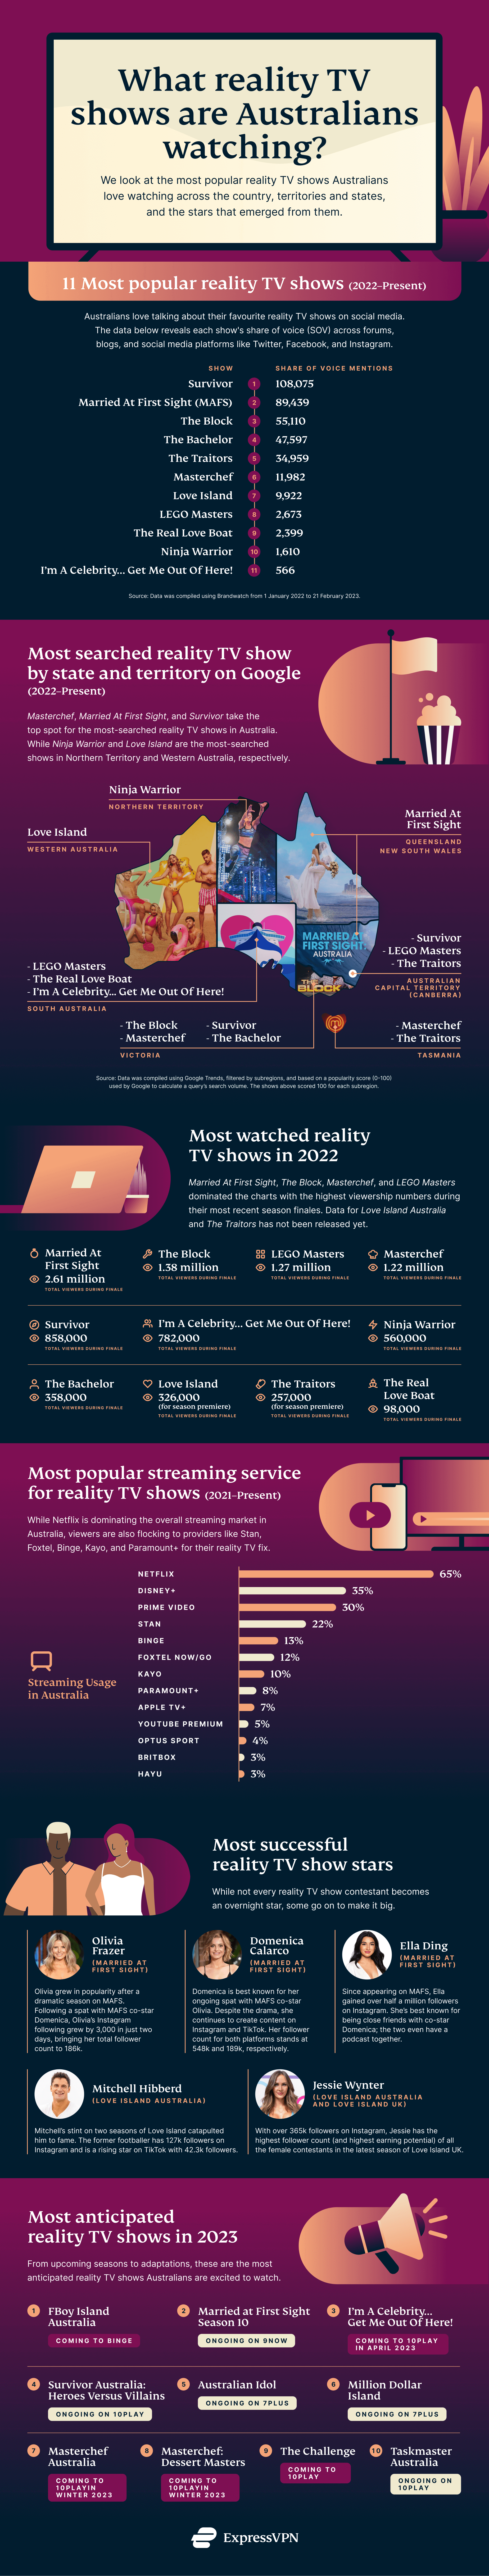 11-most-popular-reality-shows-australia-infographic (1)